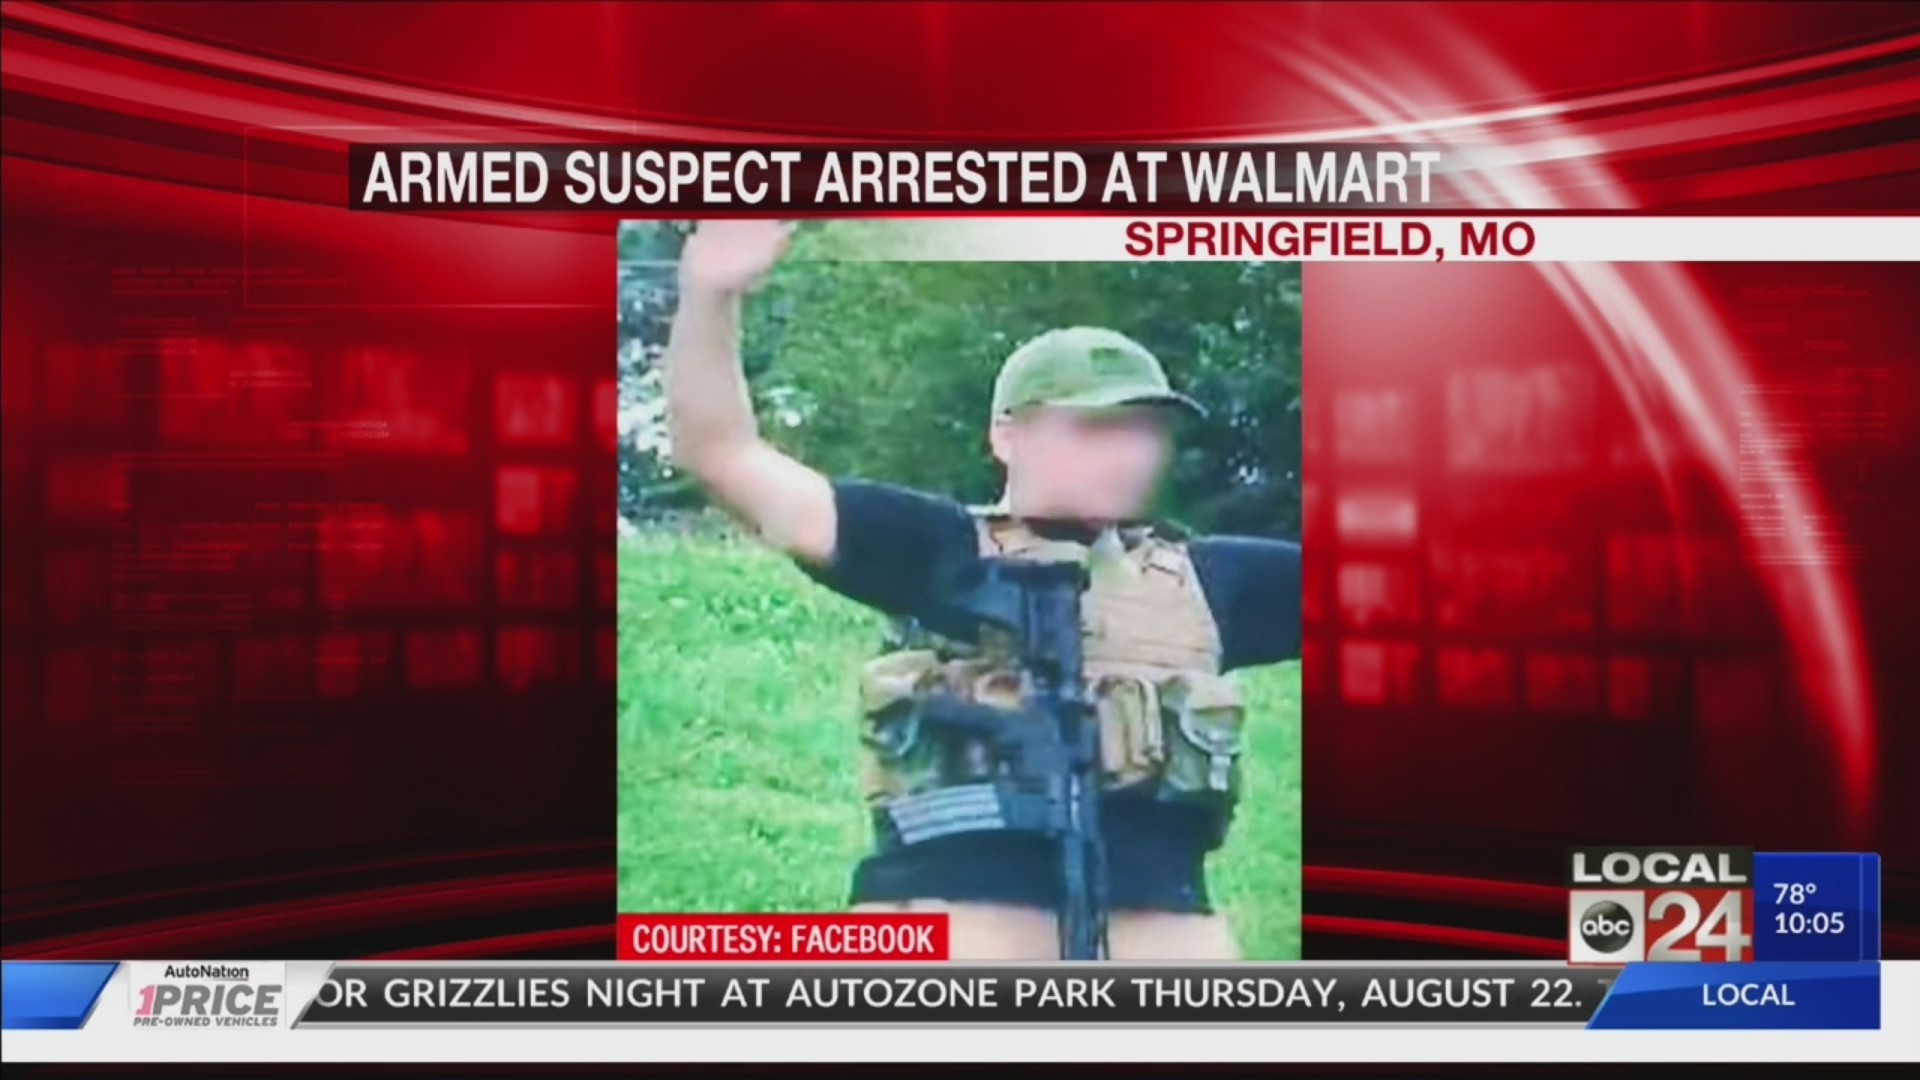 Man with rifle and 100 rounds of ammunition arrested at Walmart in Springfield, Missouri